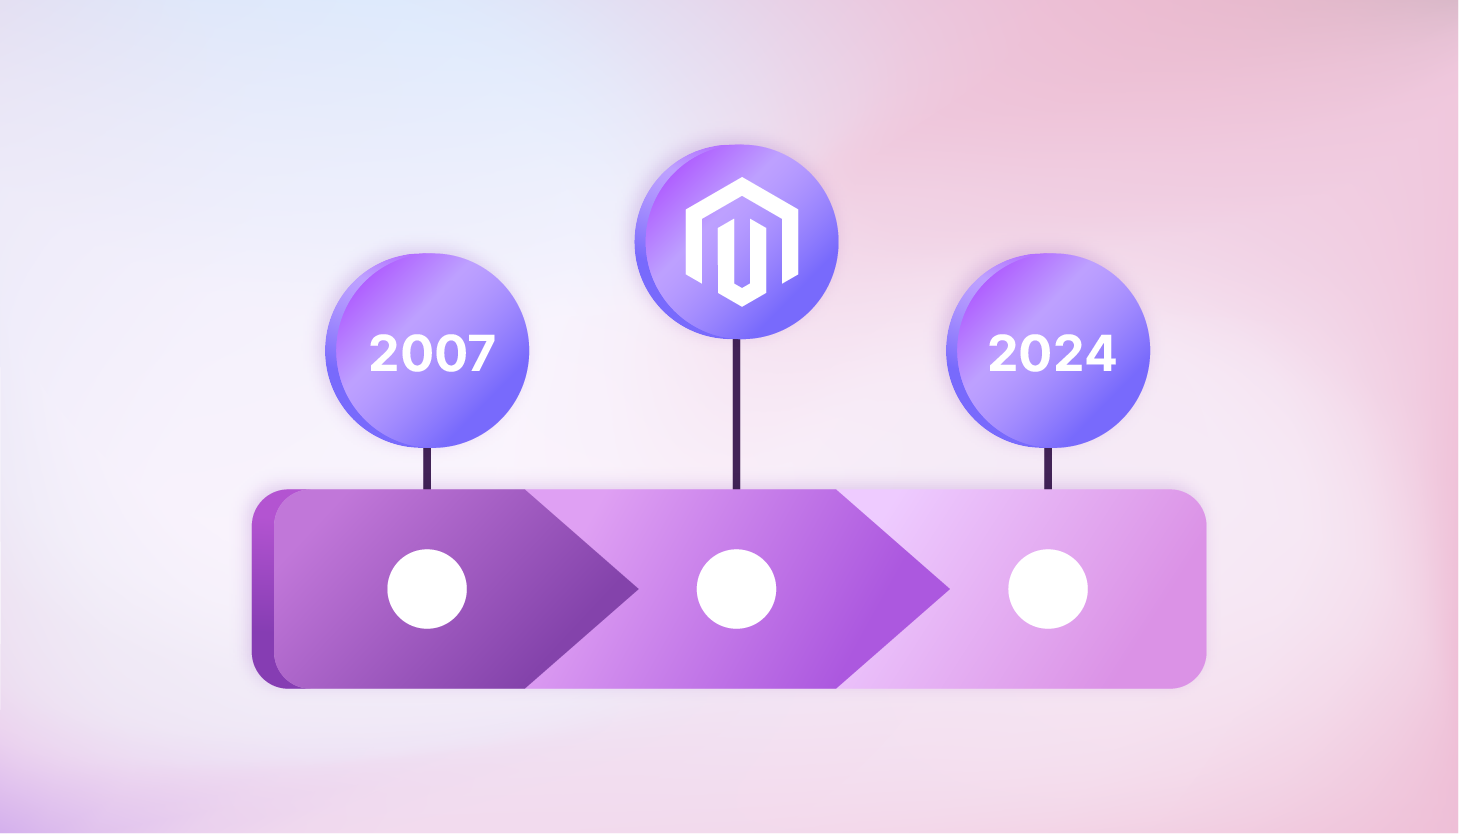 Magento History: 2007-2024 Timeline, Growth, and Versions